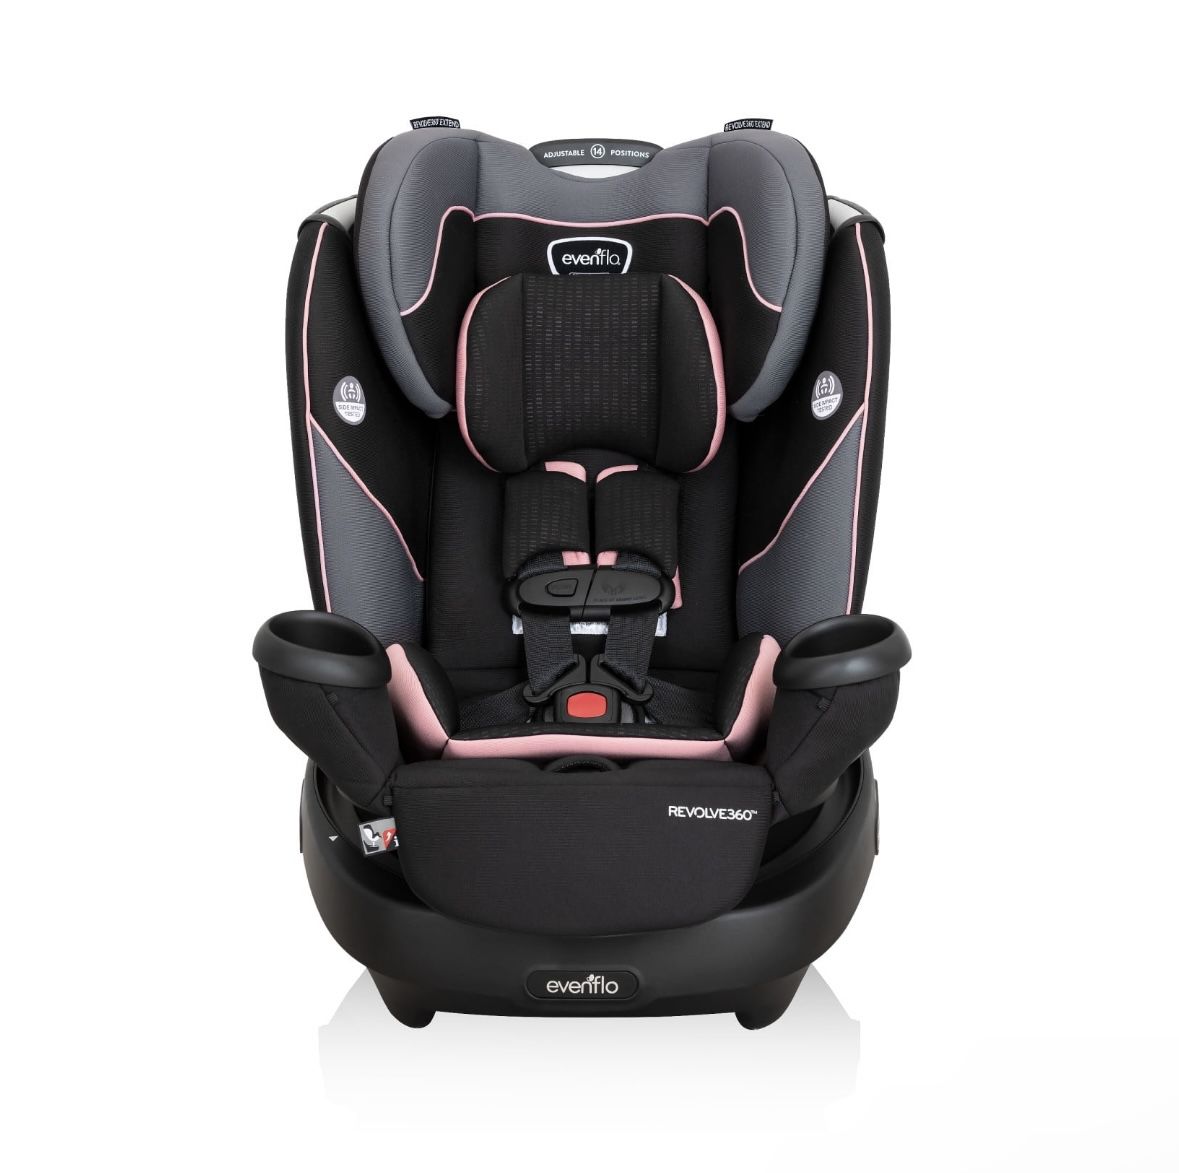 Evenflo Revolve360 Rotational All-In-One Convertible Car Seat (Ainsley Pink)